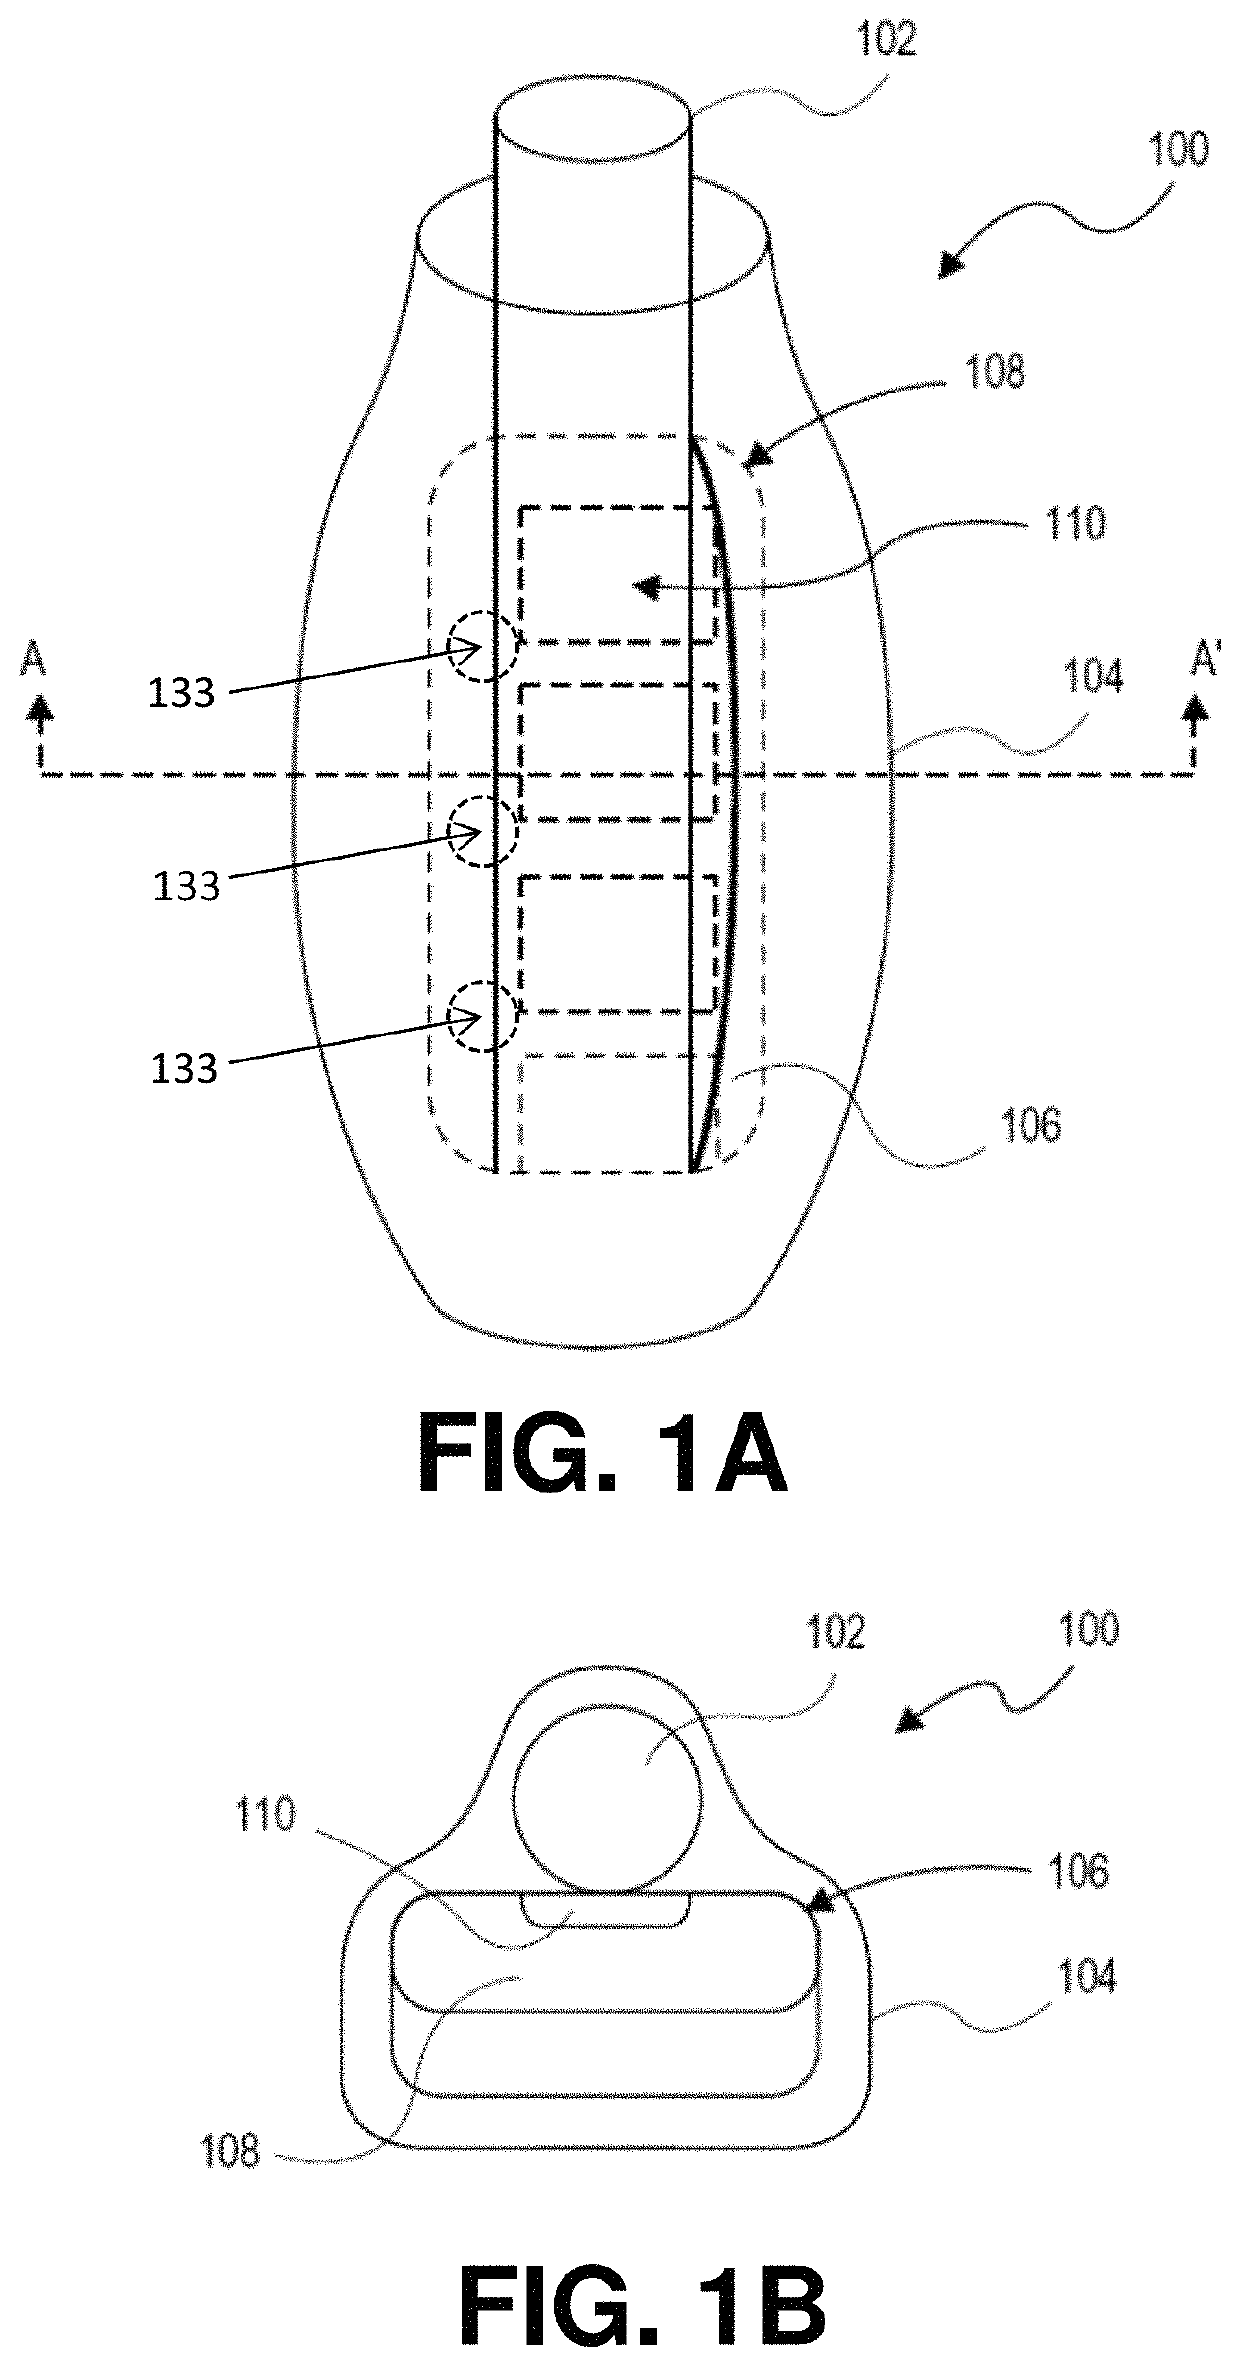 Systems and methods for establishing a nerve block